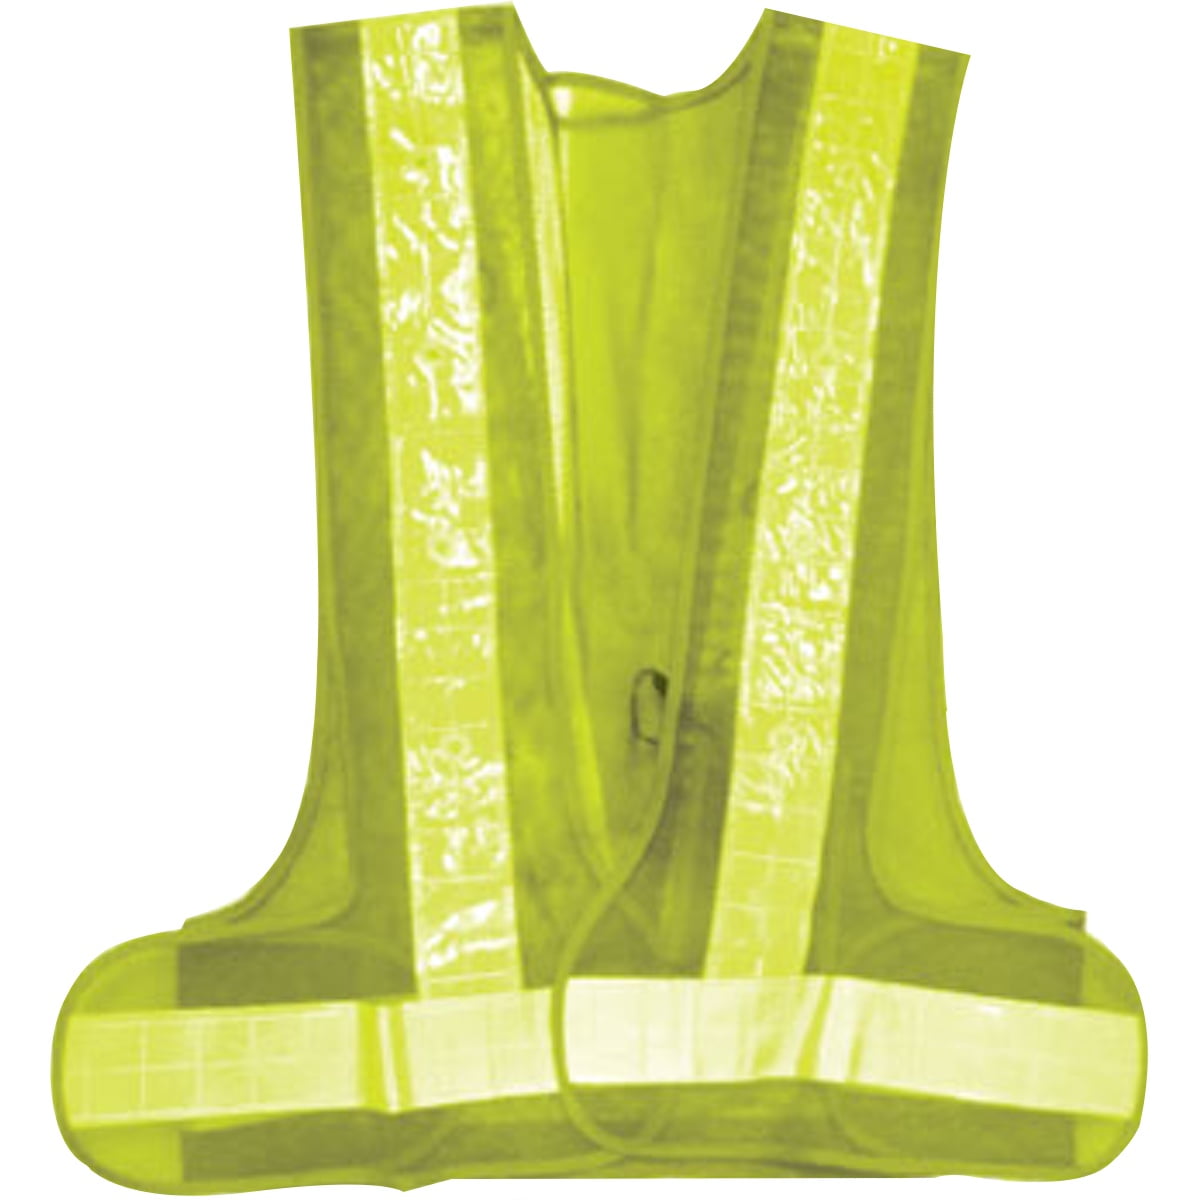 LED Glowing in Dark Light Up Luminous Reflective Vest Safety Security Adjustable 